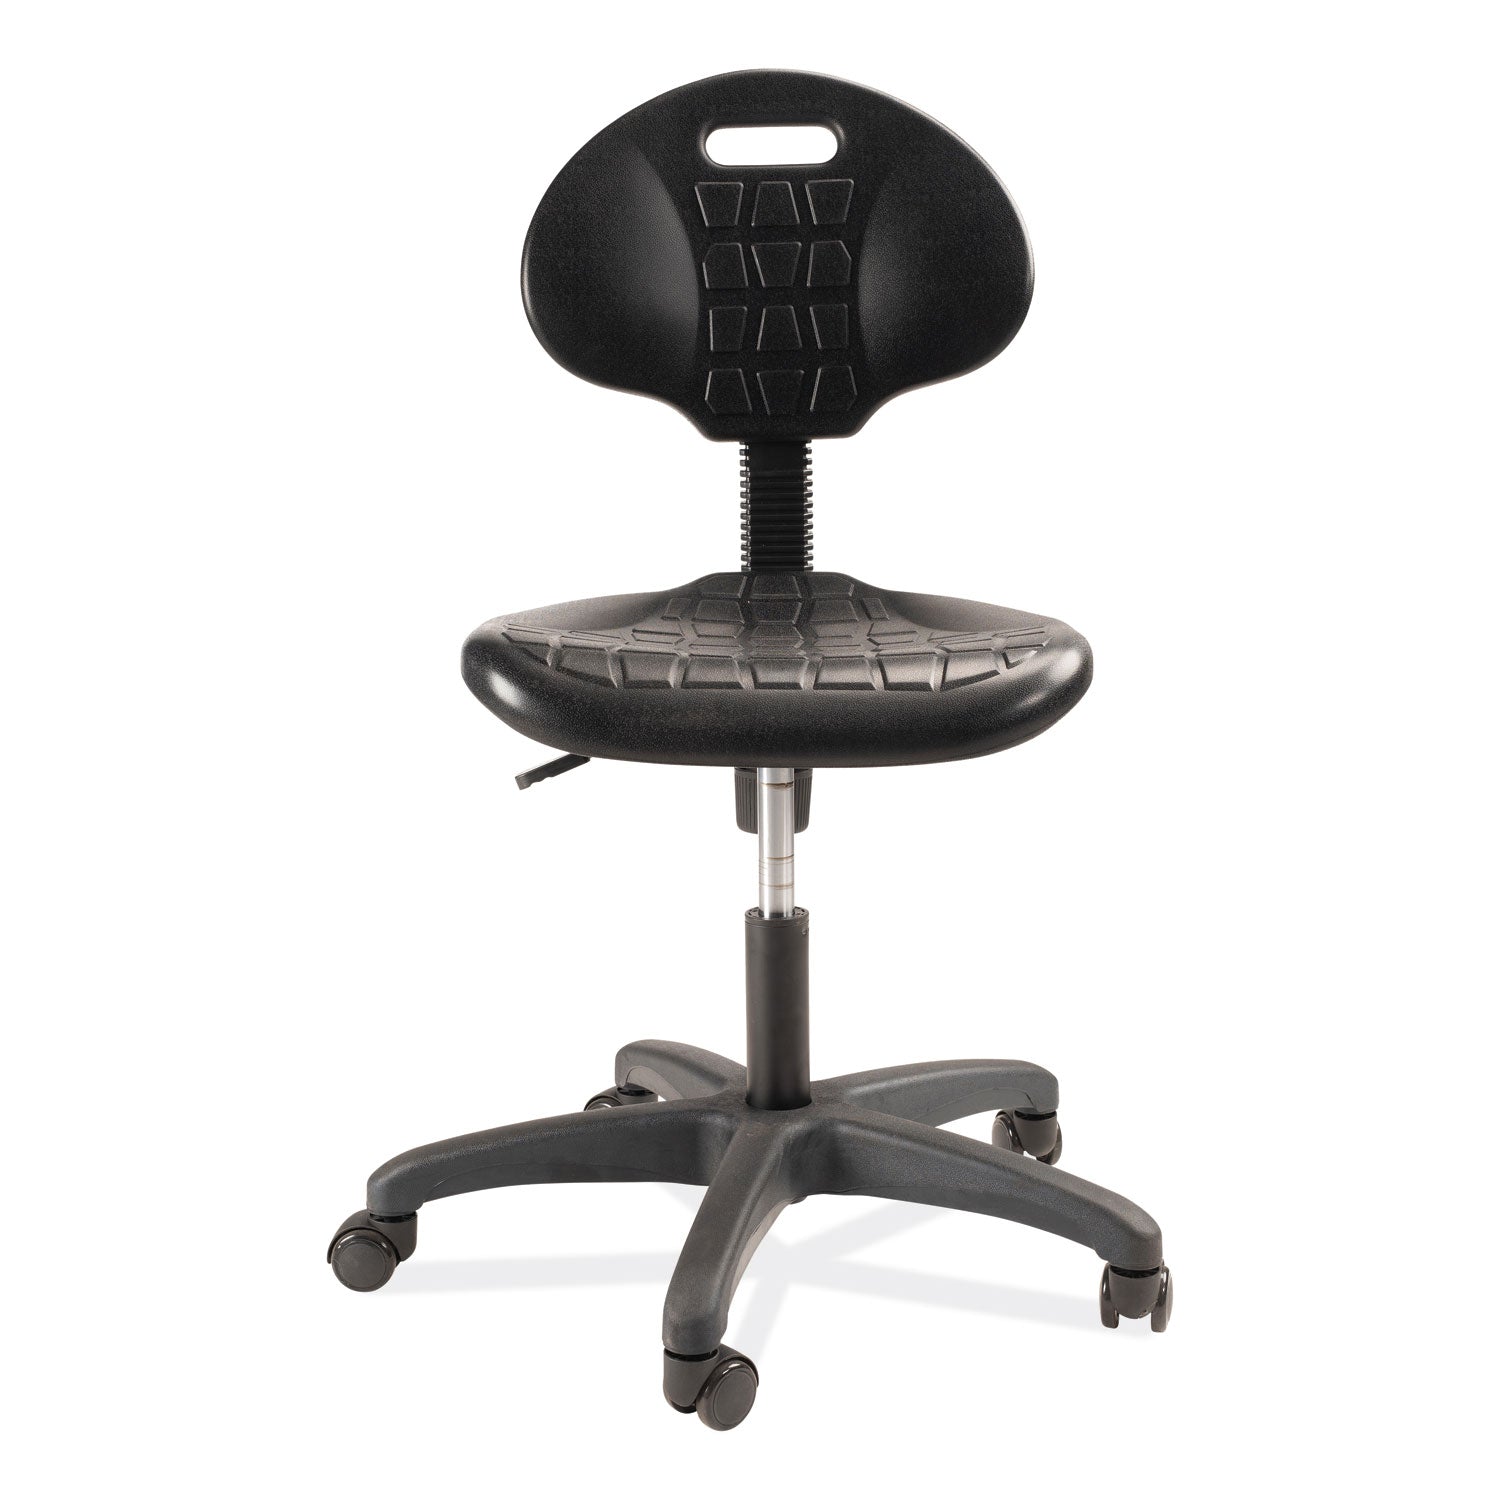 6700-series-polyurethane-adj-height-task-chair-supports-300-lb-16-21-seat-ht-black-seat-back-base-ships-in-1-3-bus-days_nps6716hb - 2